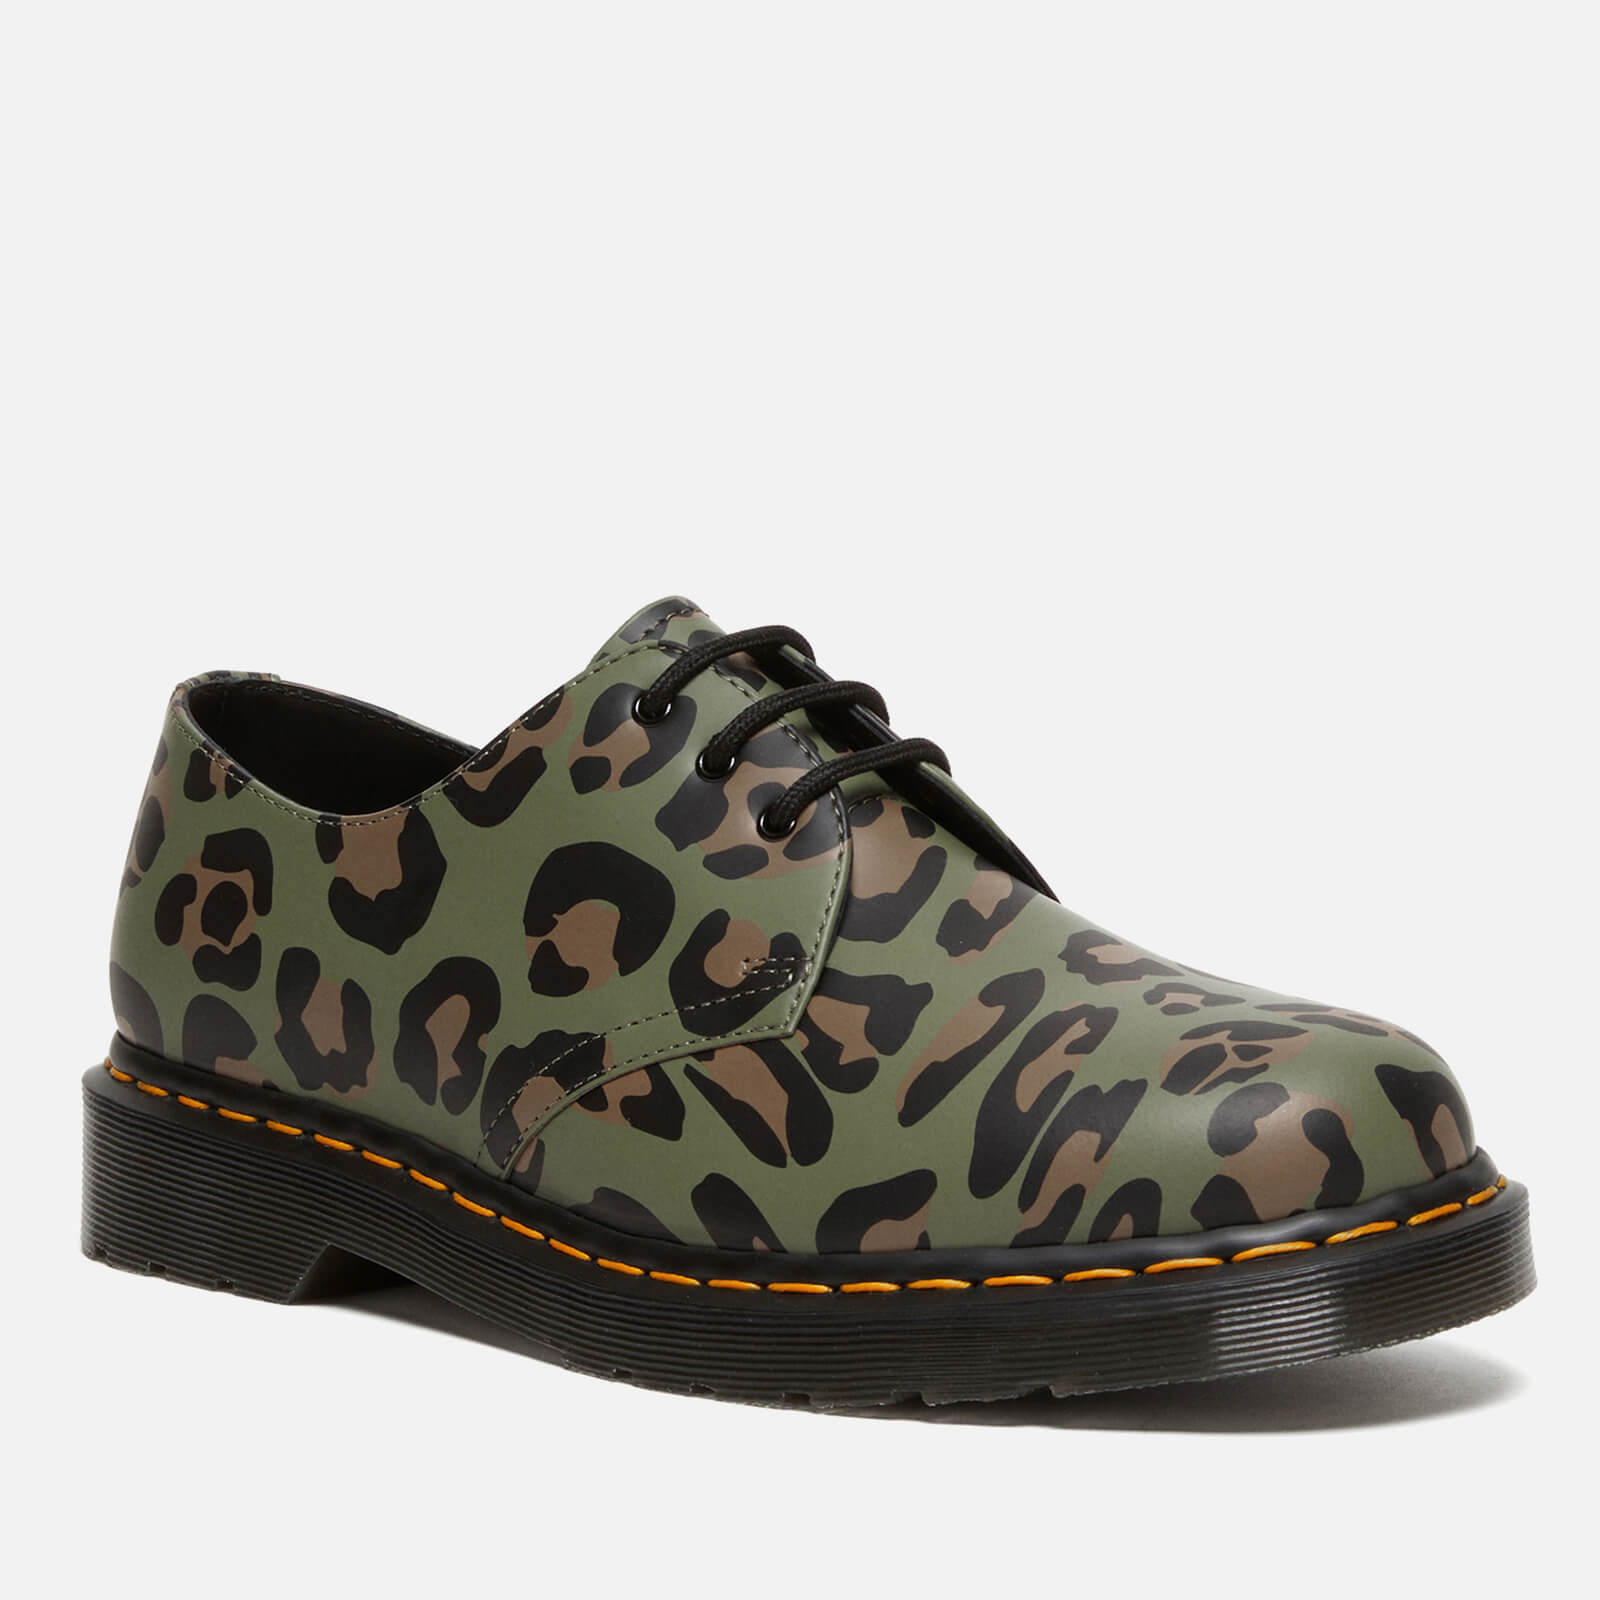 Dr. Martens Men's 1461 Smooth Leather 3-Eye Shoes - Distorted Leopard Khaki Green - UK 7